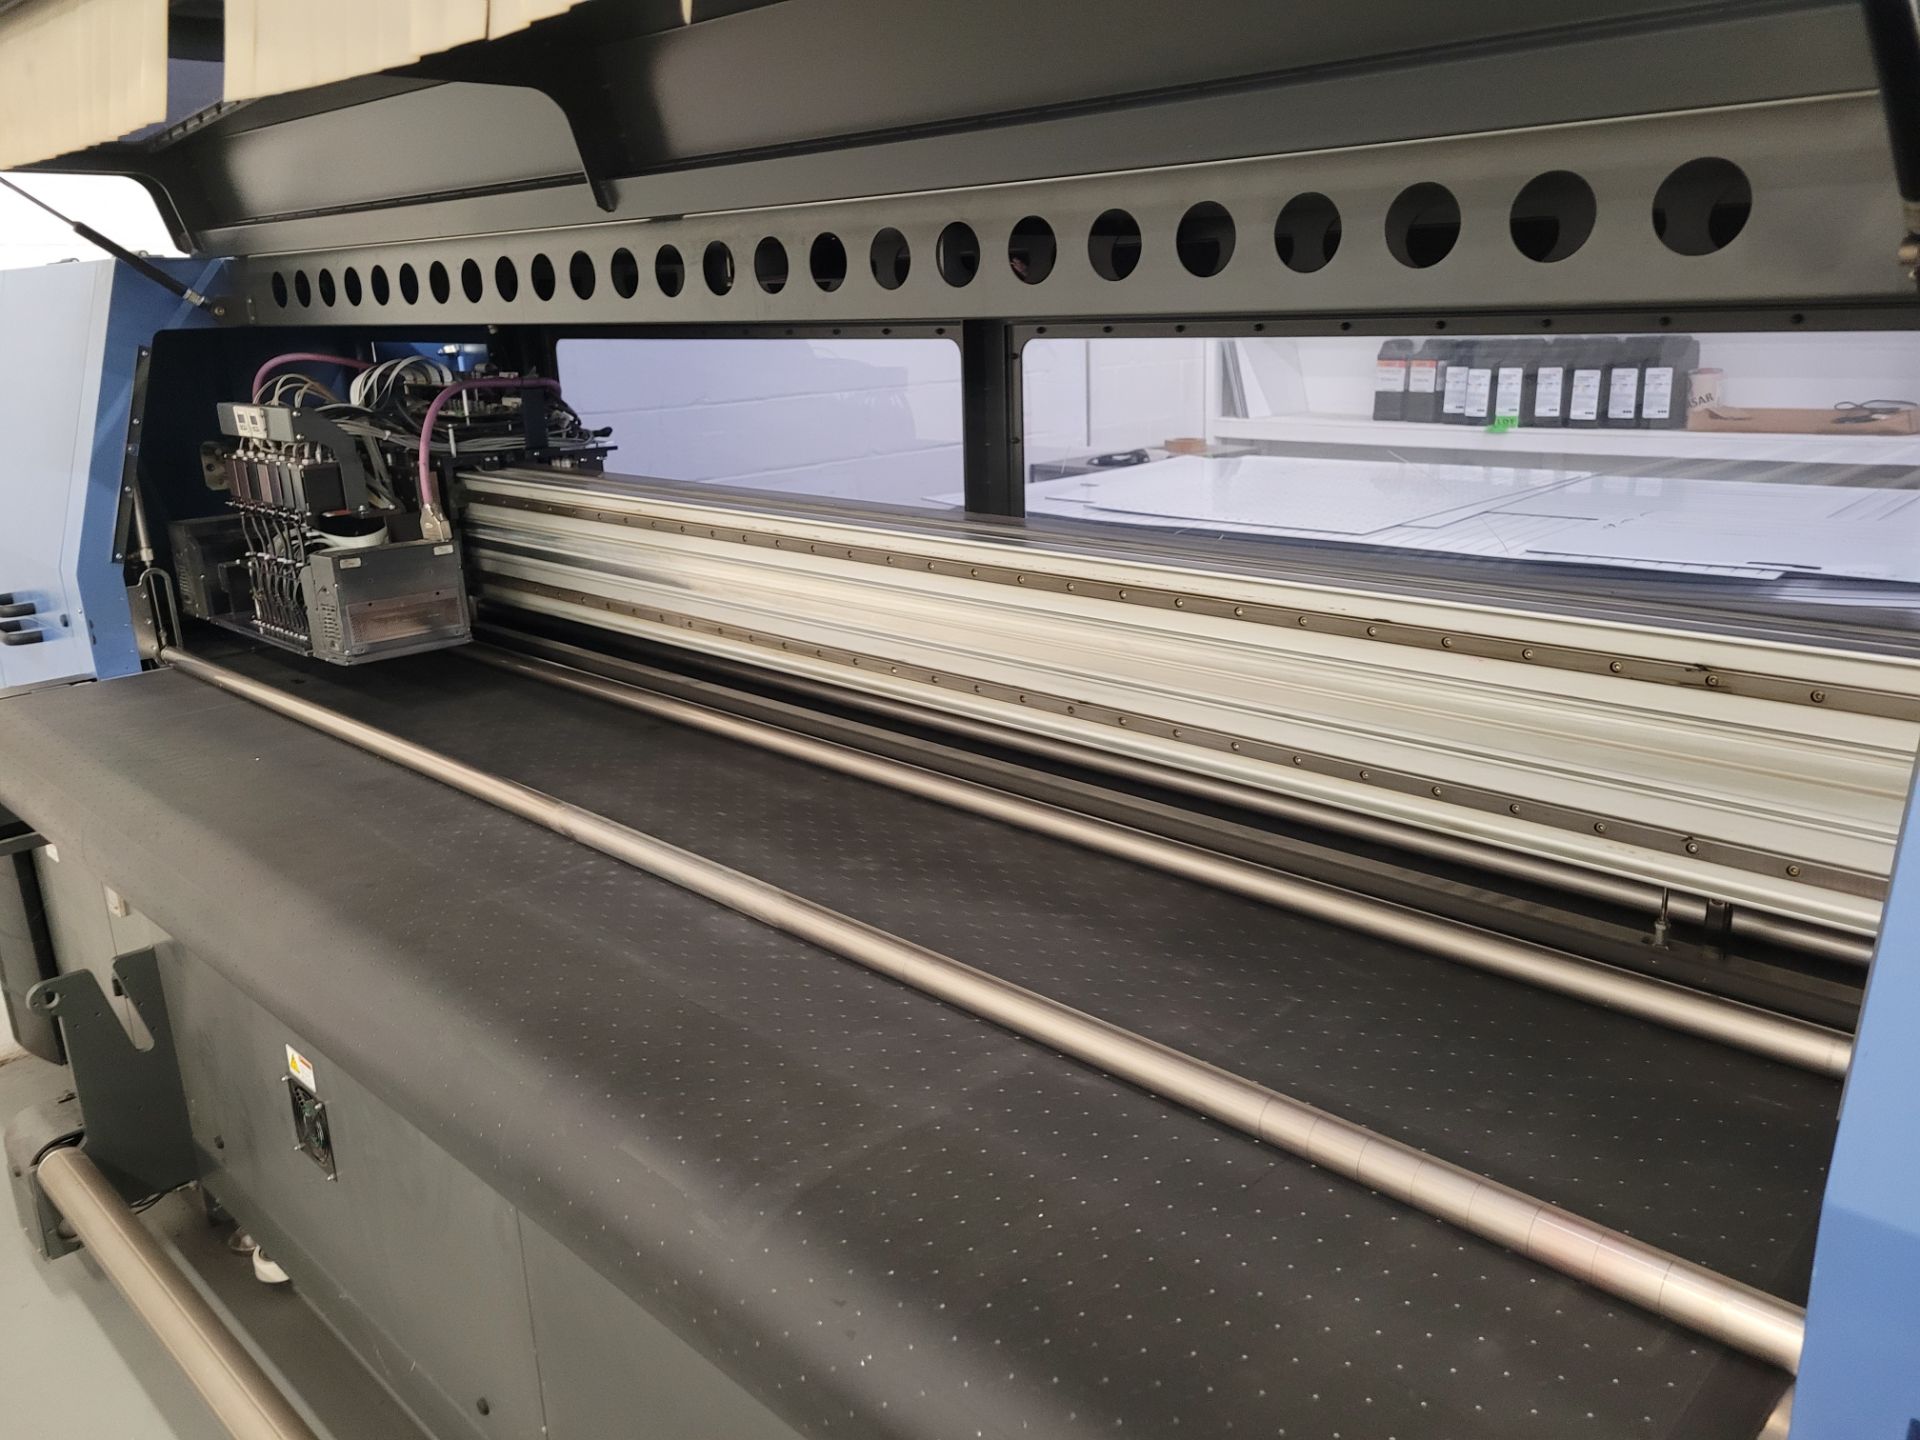 DYSS UV Printing Machine mod. Lasco & Apollo, ser. 221674RR000100264, 220V, includes conveyors and - Image 8 of 37